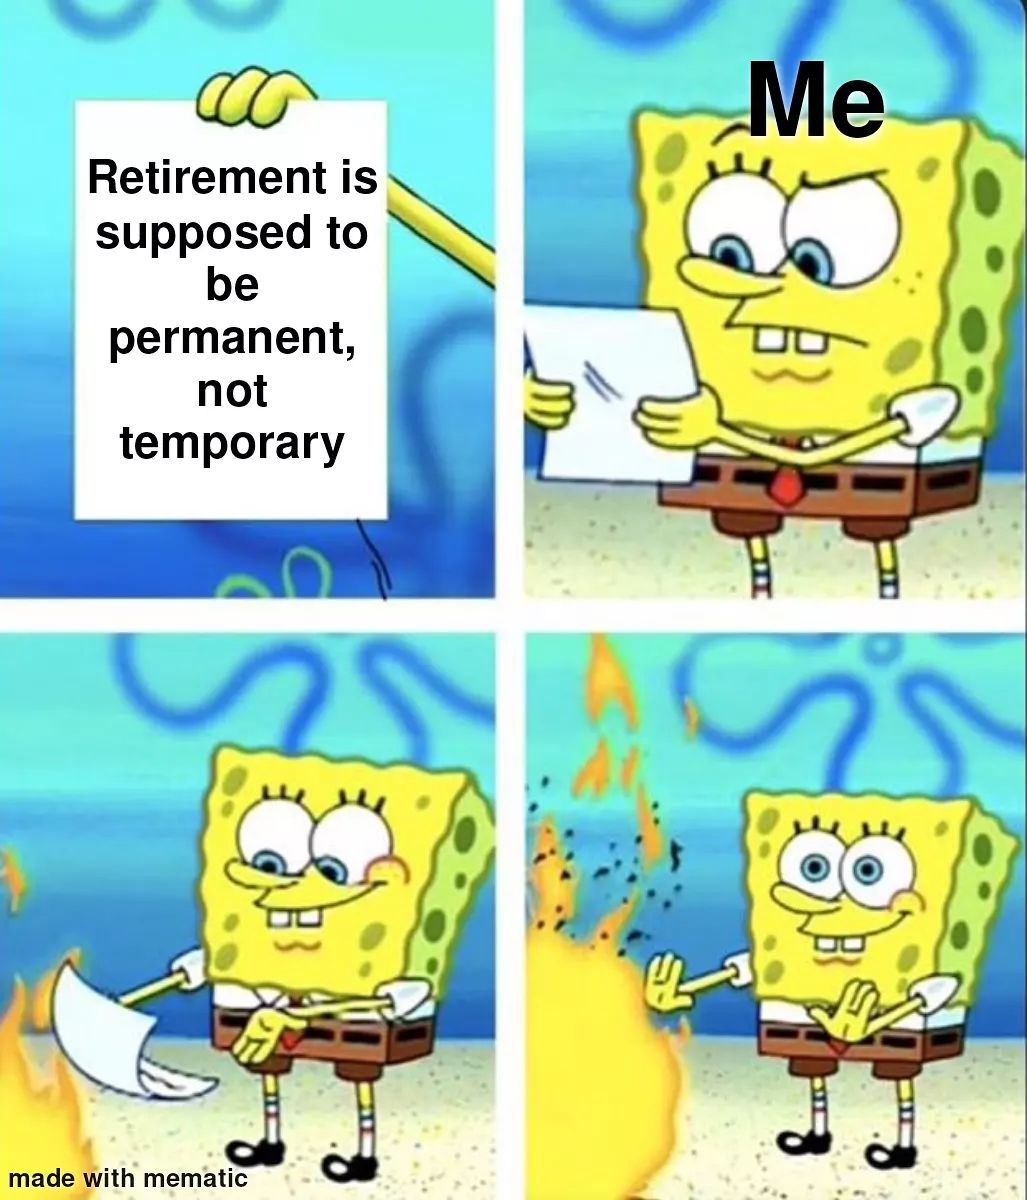 Retirement is supposed to be permanent, not temporary. Me.